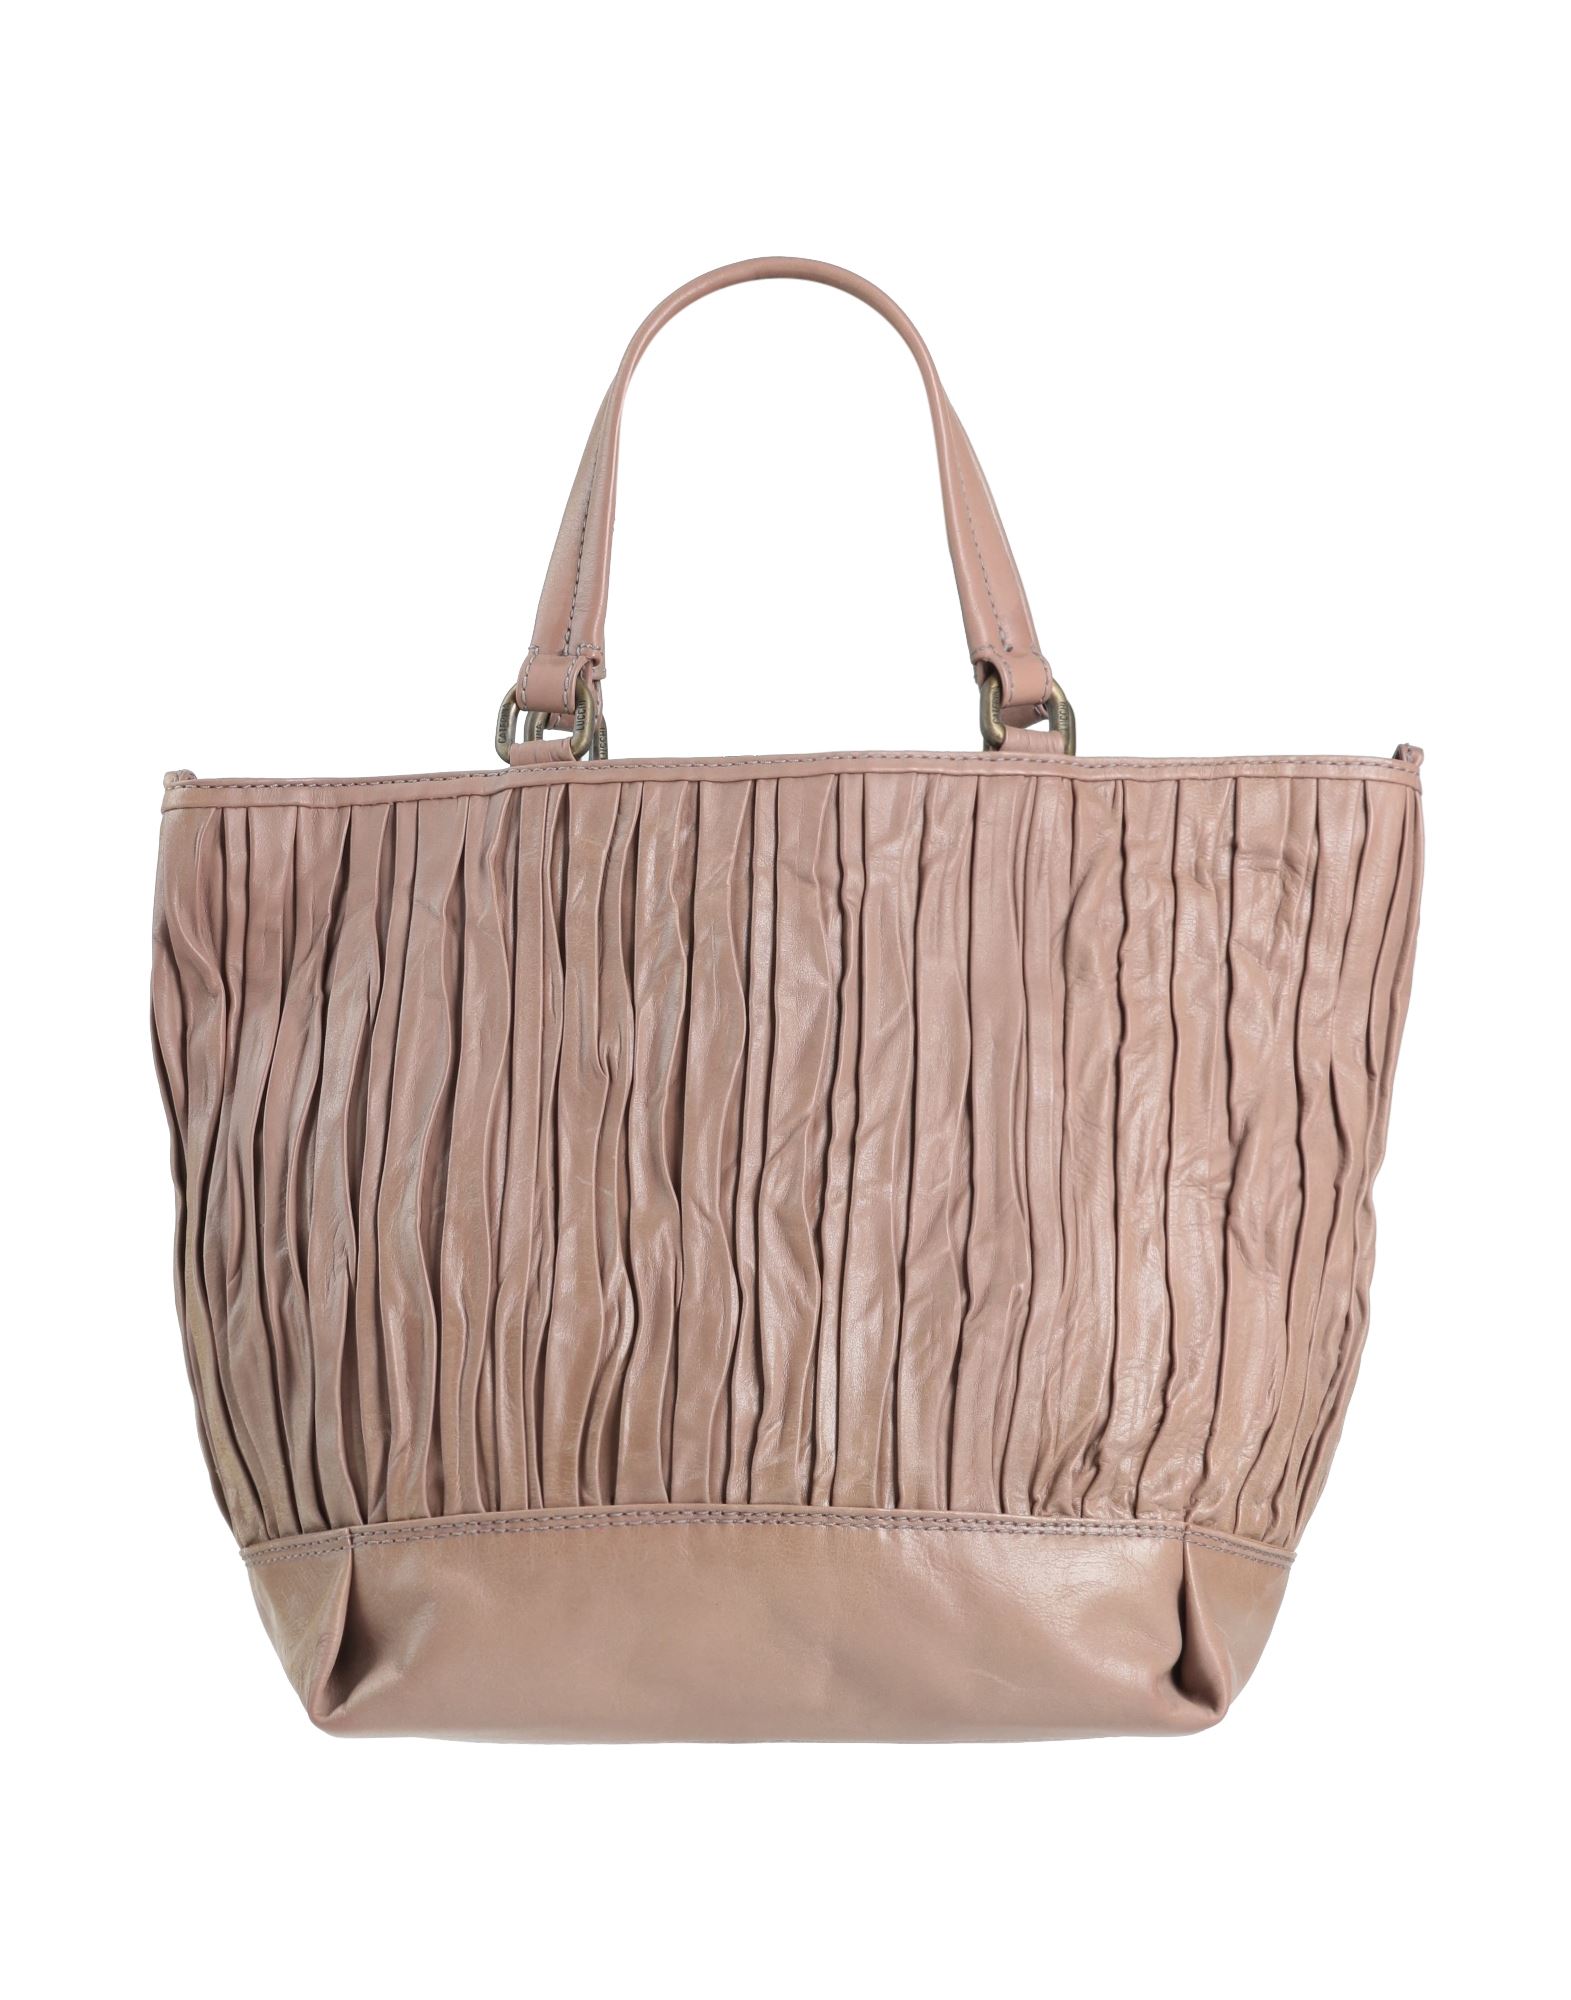 Caterina Lucchi Handbags In Light Brown